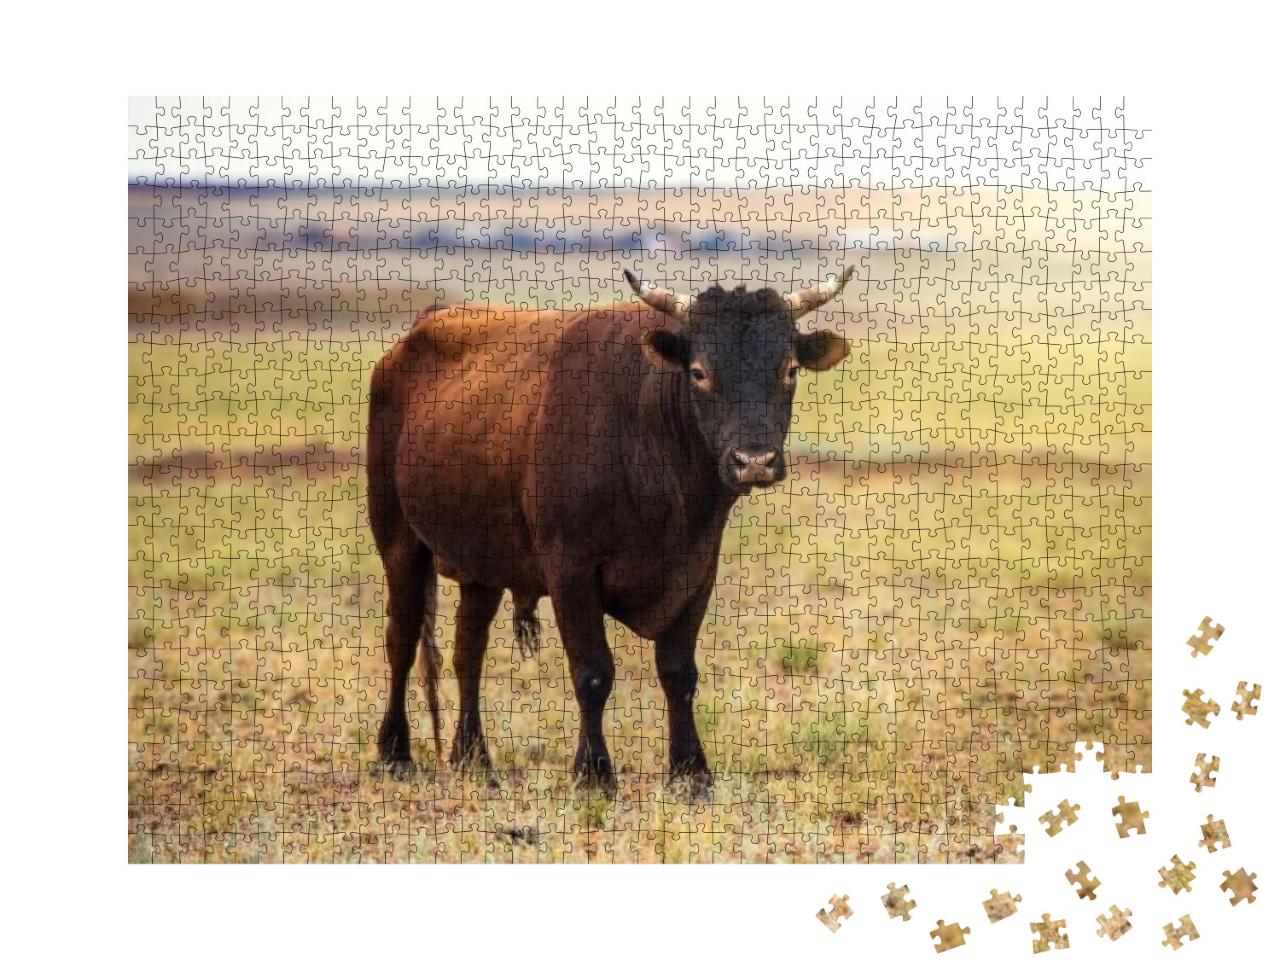 Portrait of a Large Beautiful Bull, Brown in Color, Stand... Jigsaw Puzzle with 1000 pieces